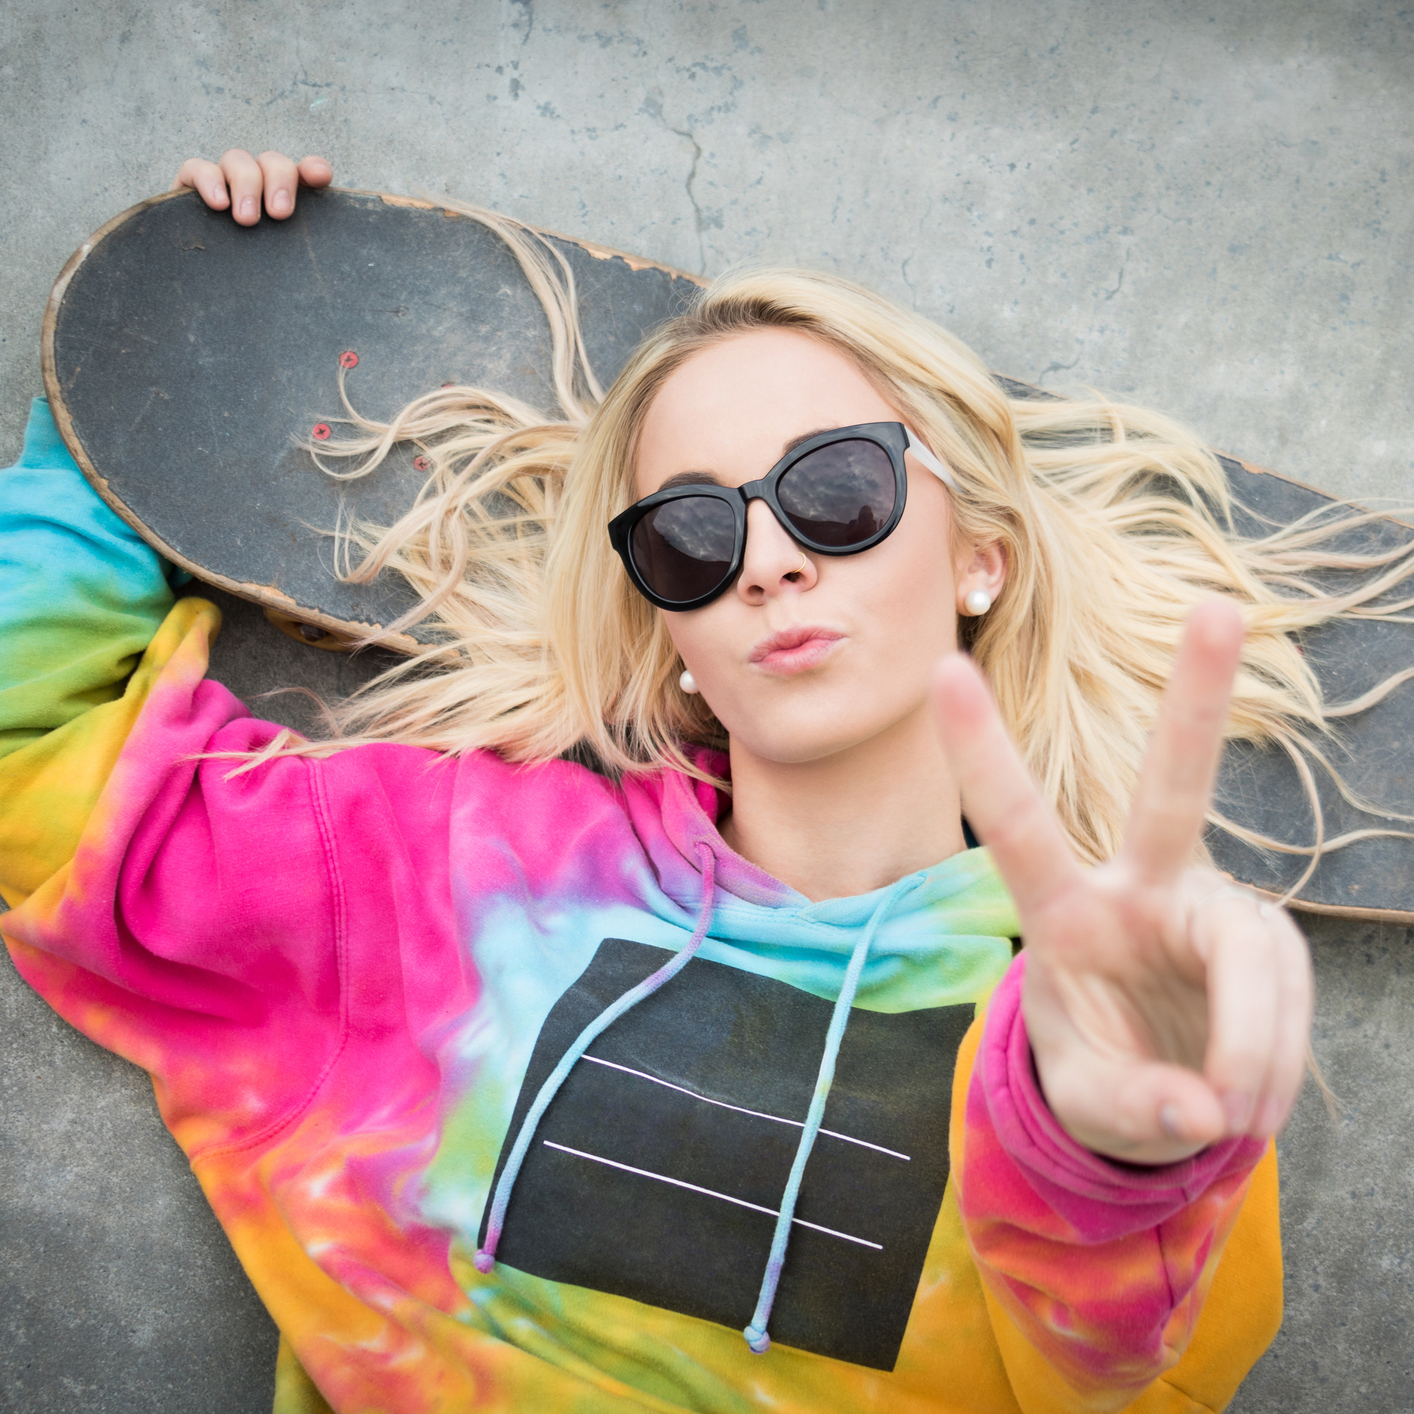 Girl wearing tie dye laying on ground with skateboard and holding a peace sign